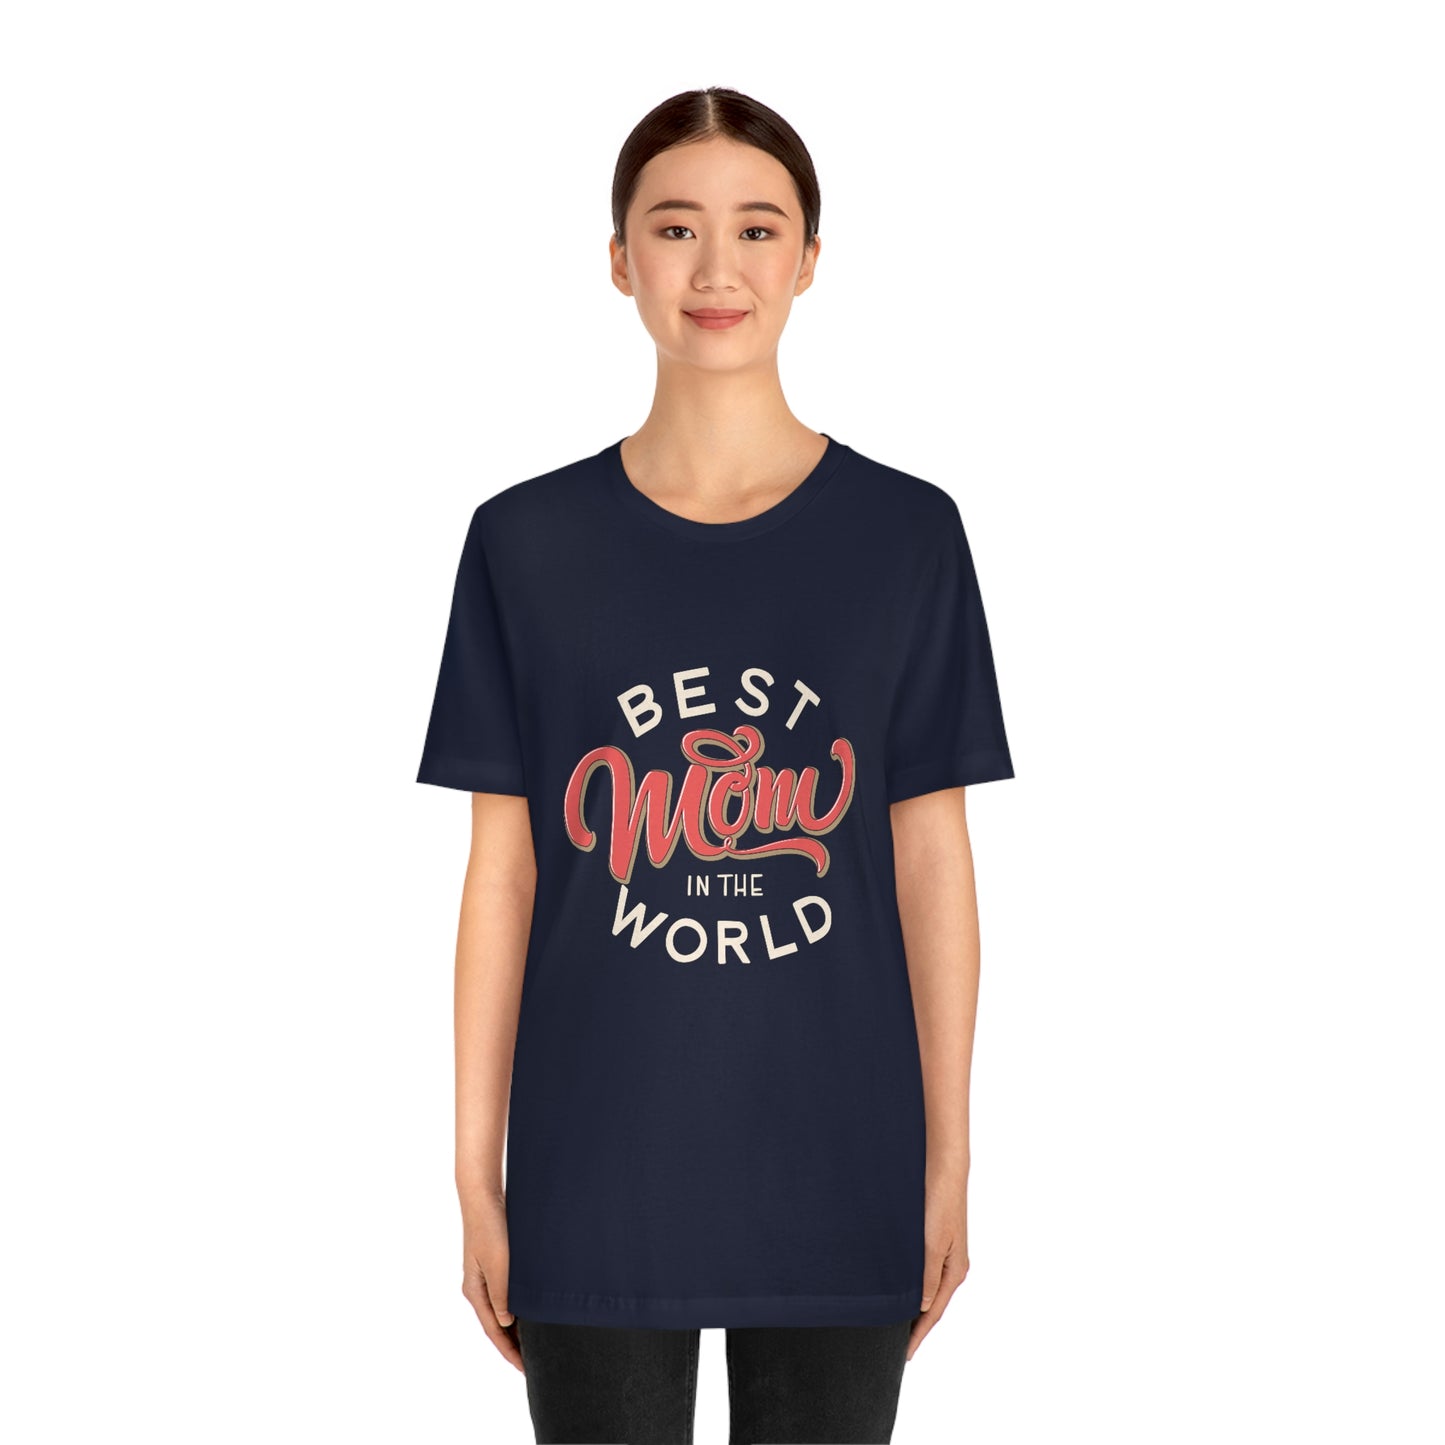 Best Mother's Day gift for Best Mom in the World. This navy t-shirt is a versatile and stylish addition to any Mom's wardrobe.